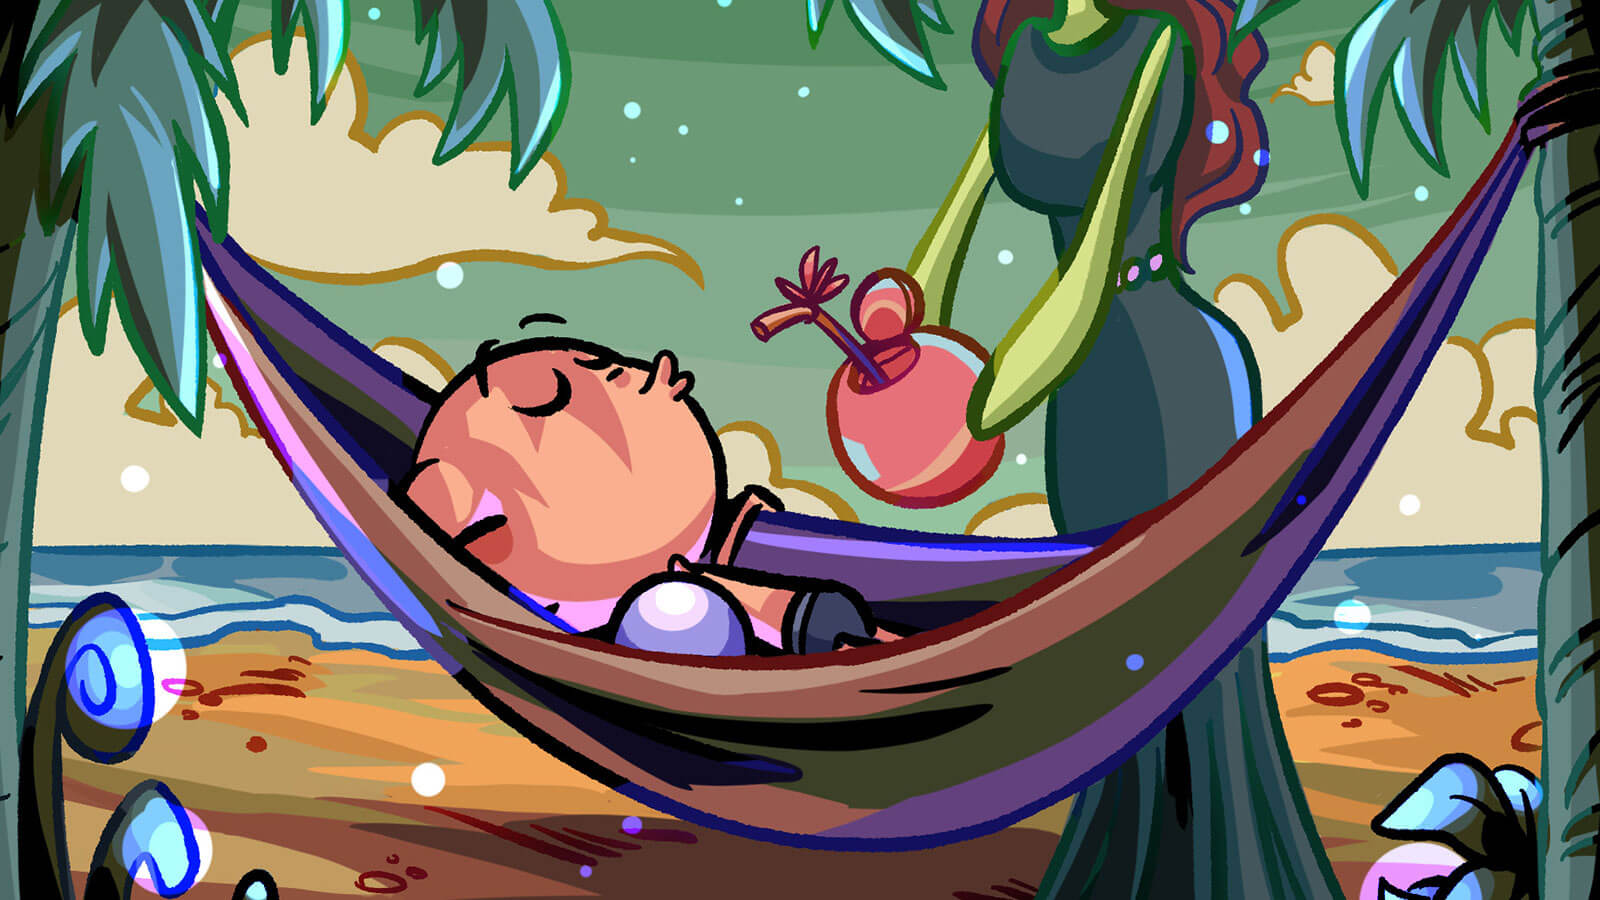 Alien character relaxes in hammock as a larger alien serves them a drink via a straw